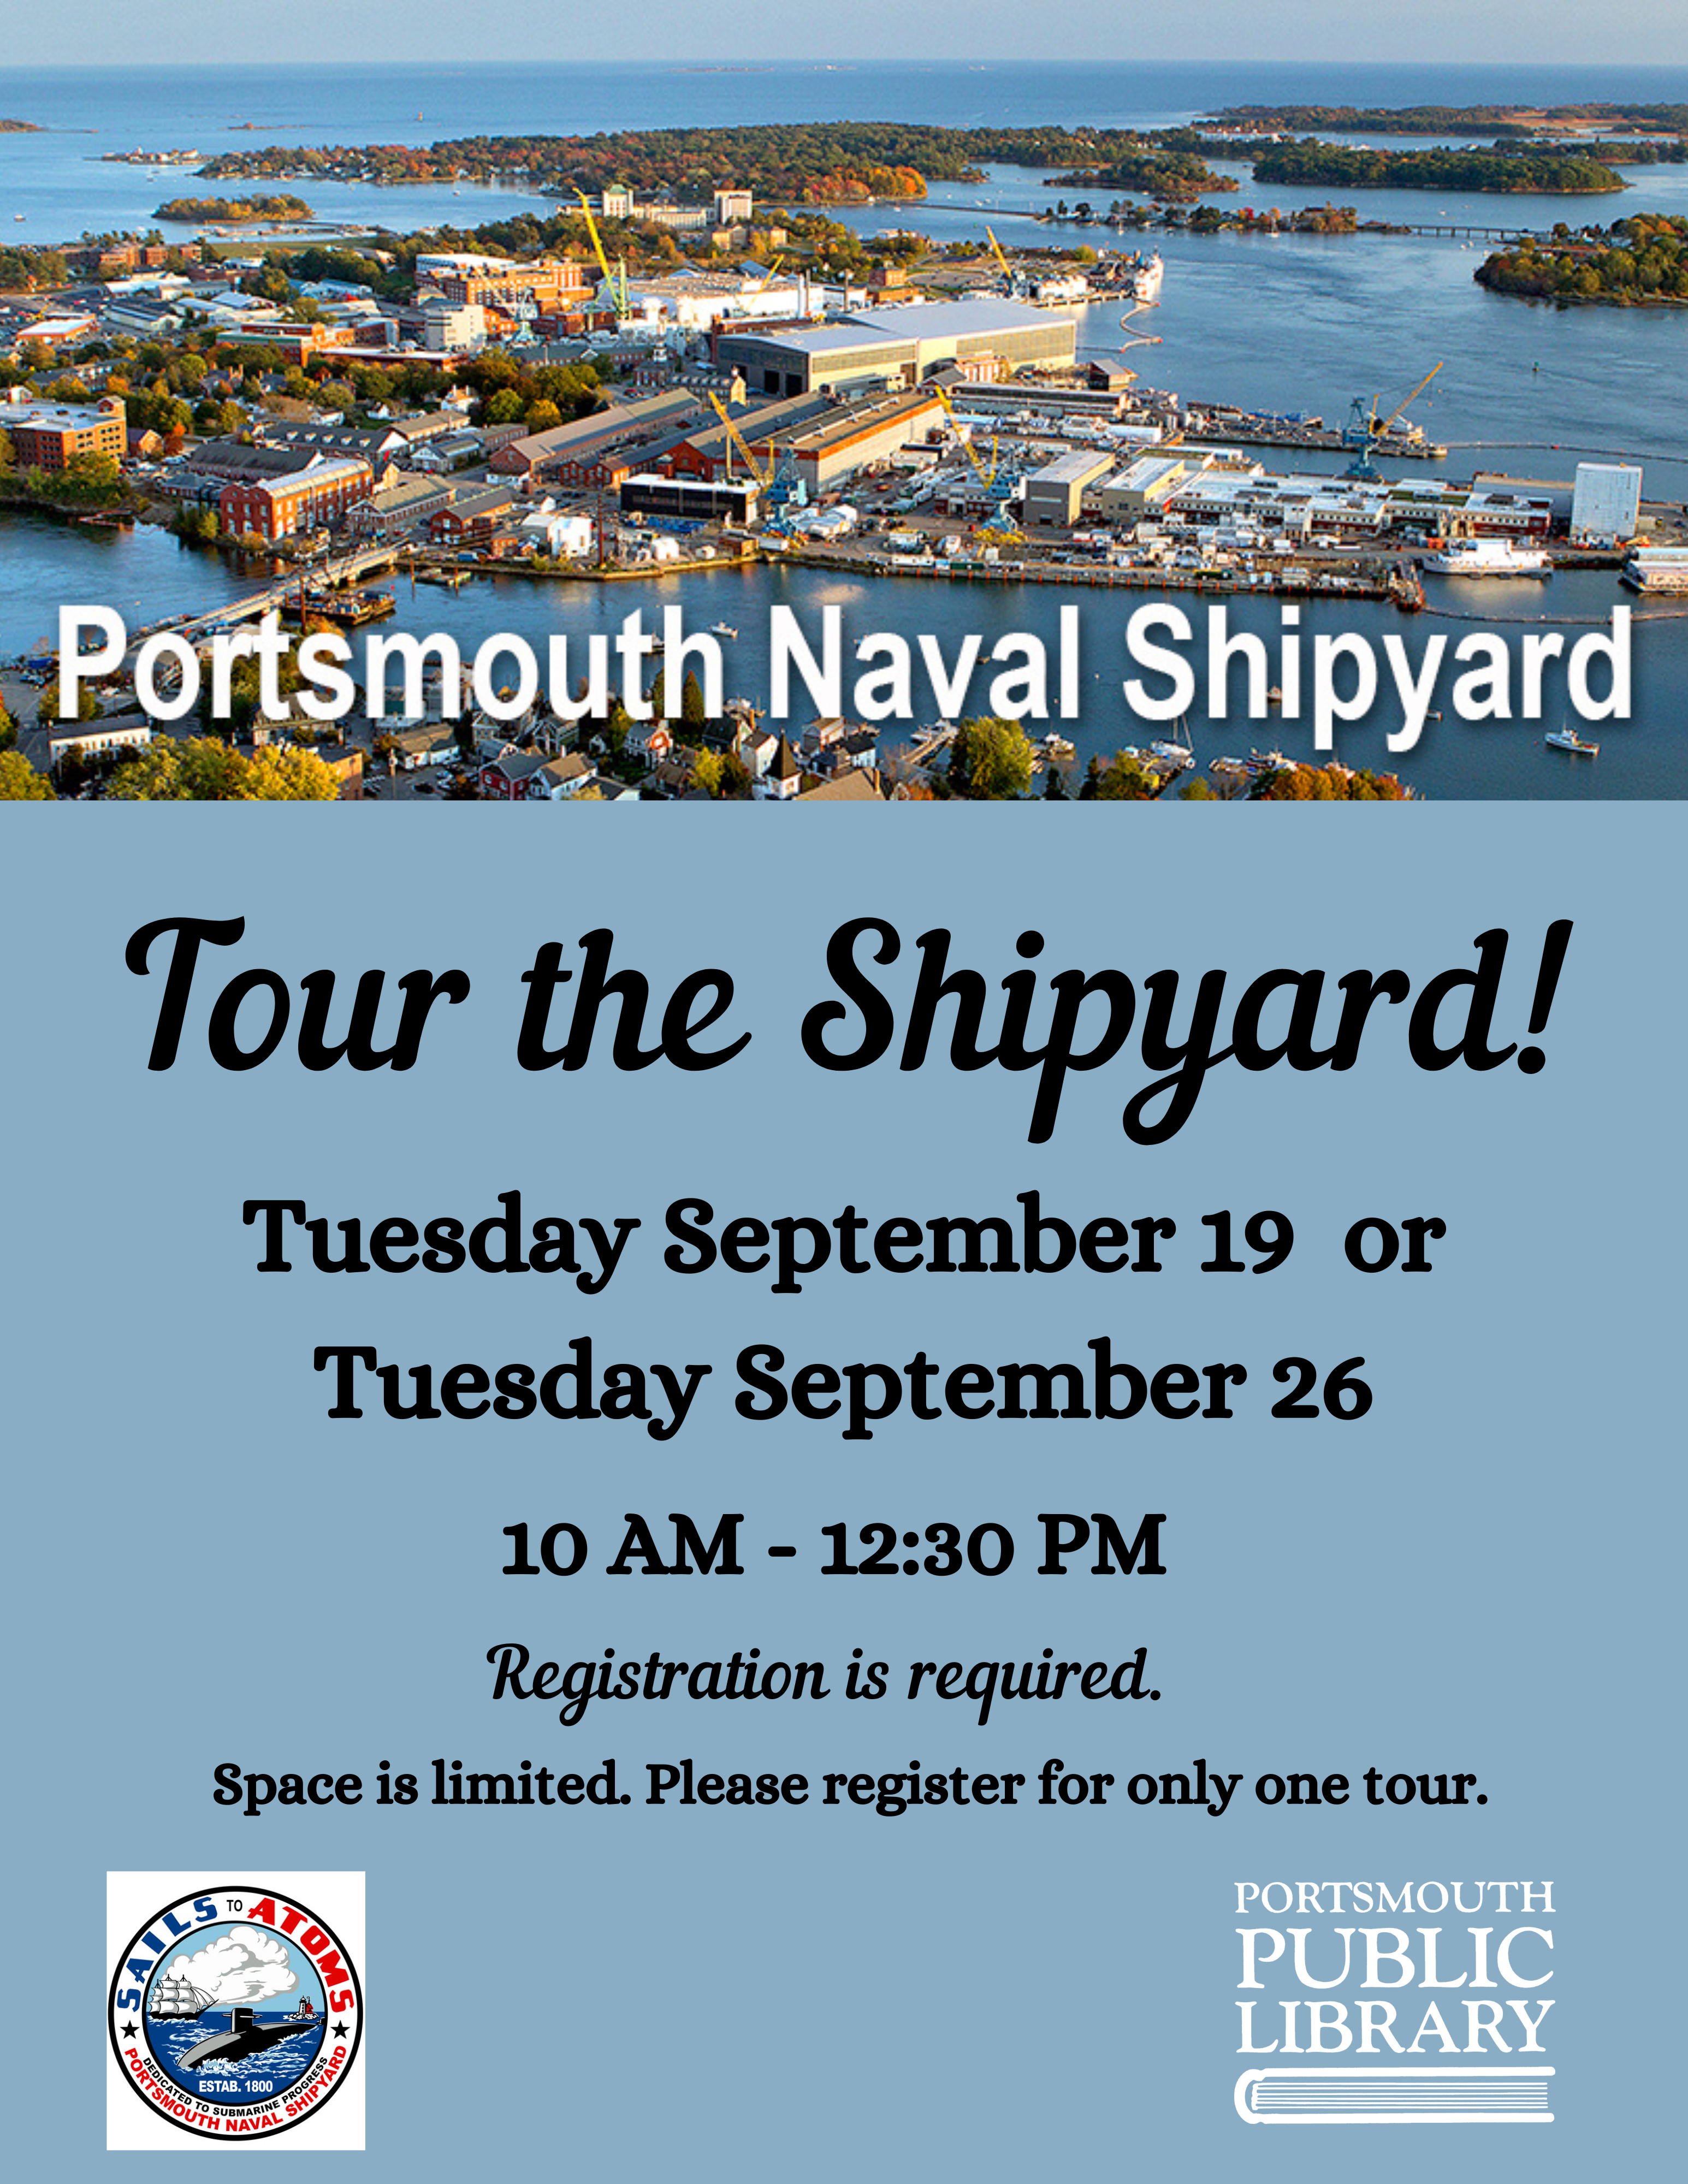 Portsmouth Naval Shipyard Tour the Shipyard Tuesday September 19 or 26 two tours  sign up for one 1o AM-12:30 PM 